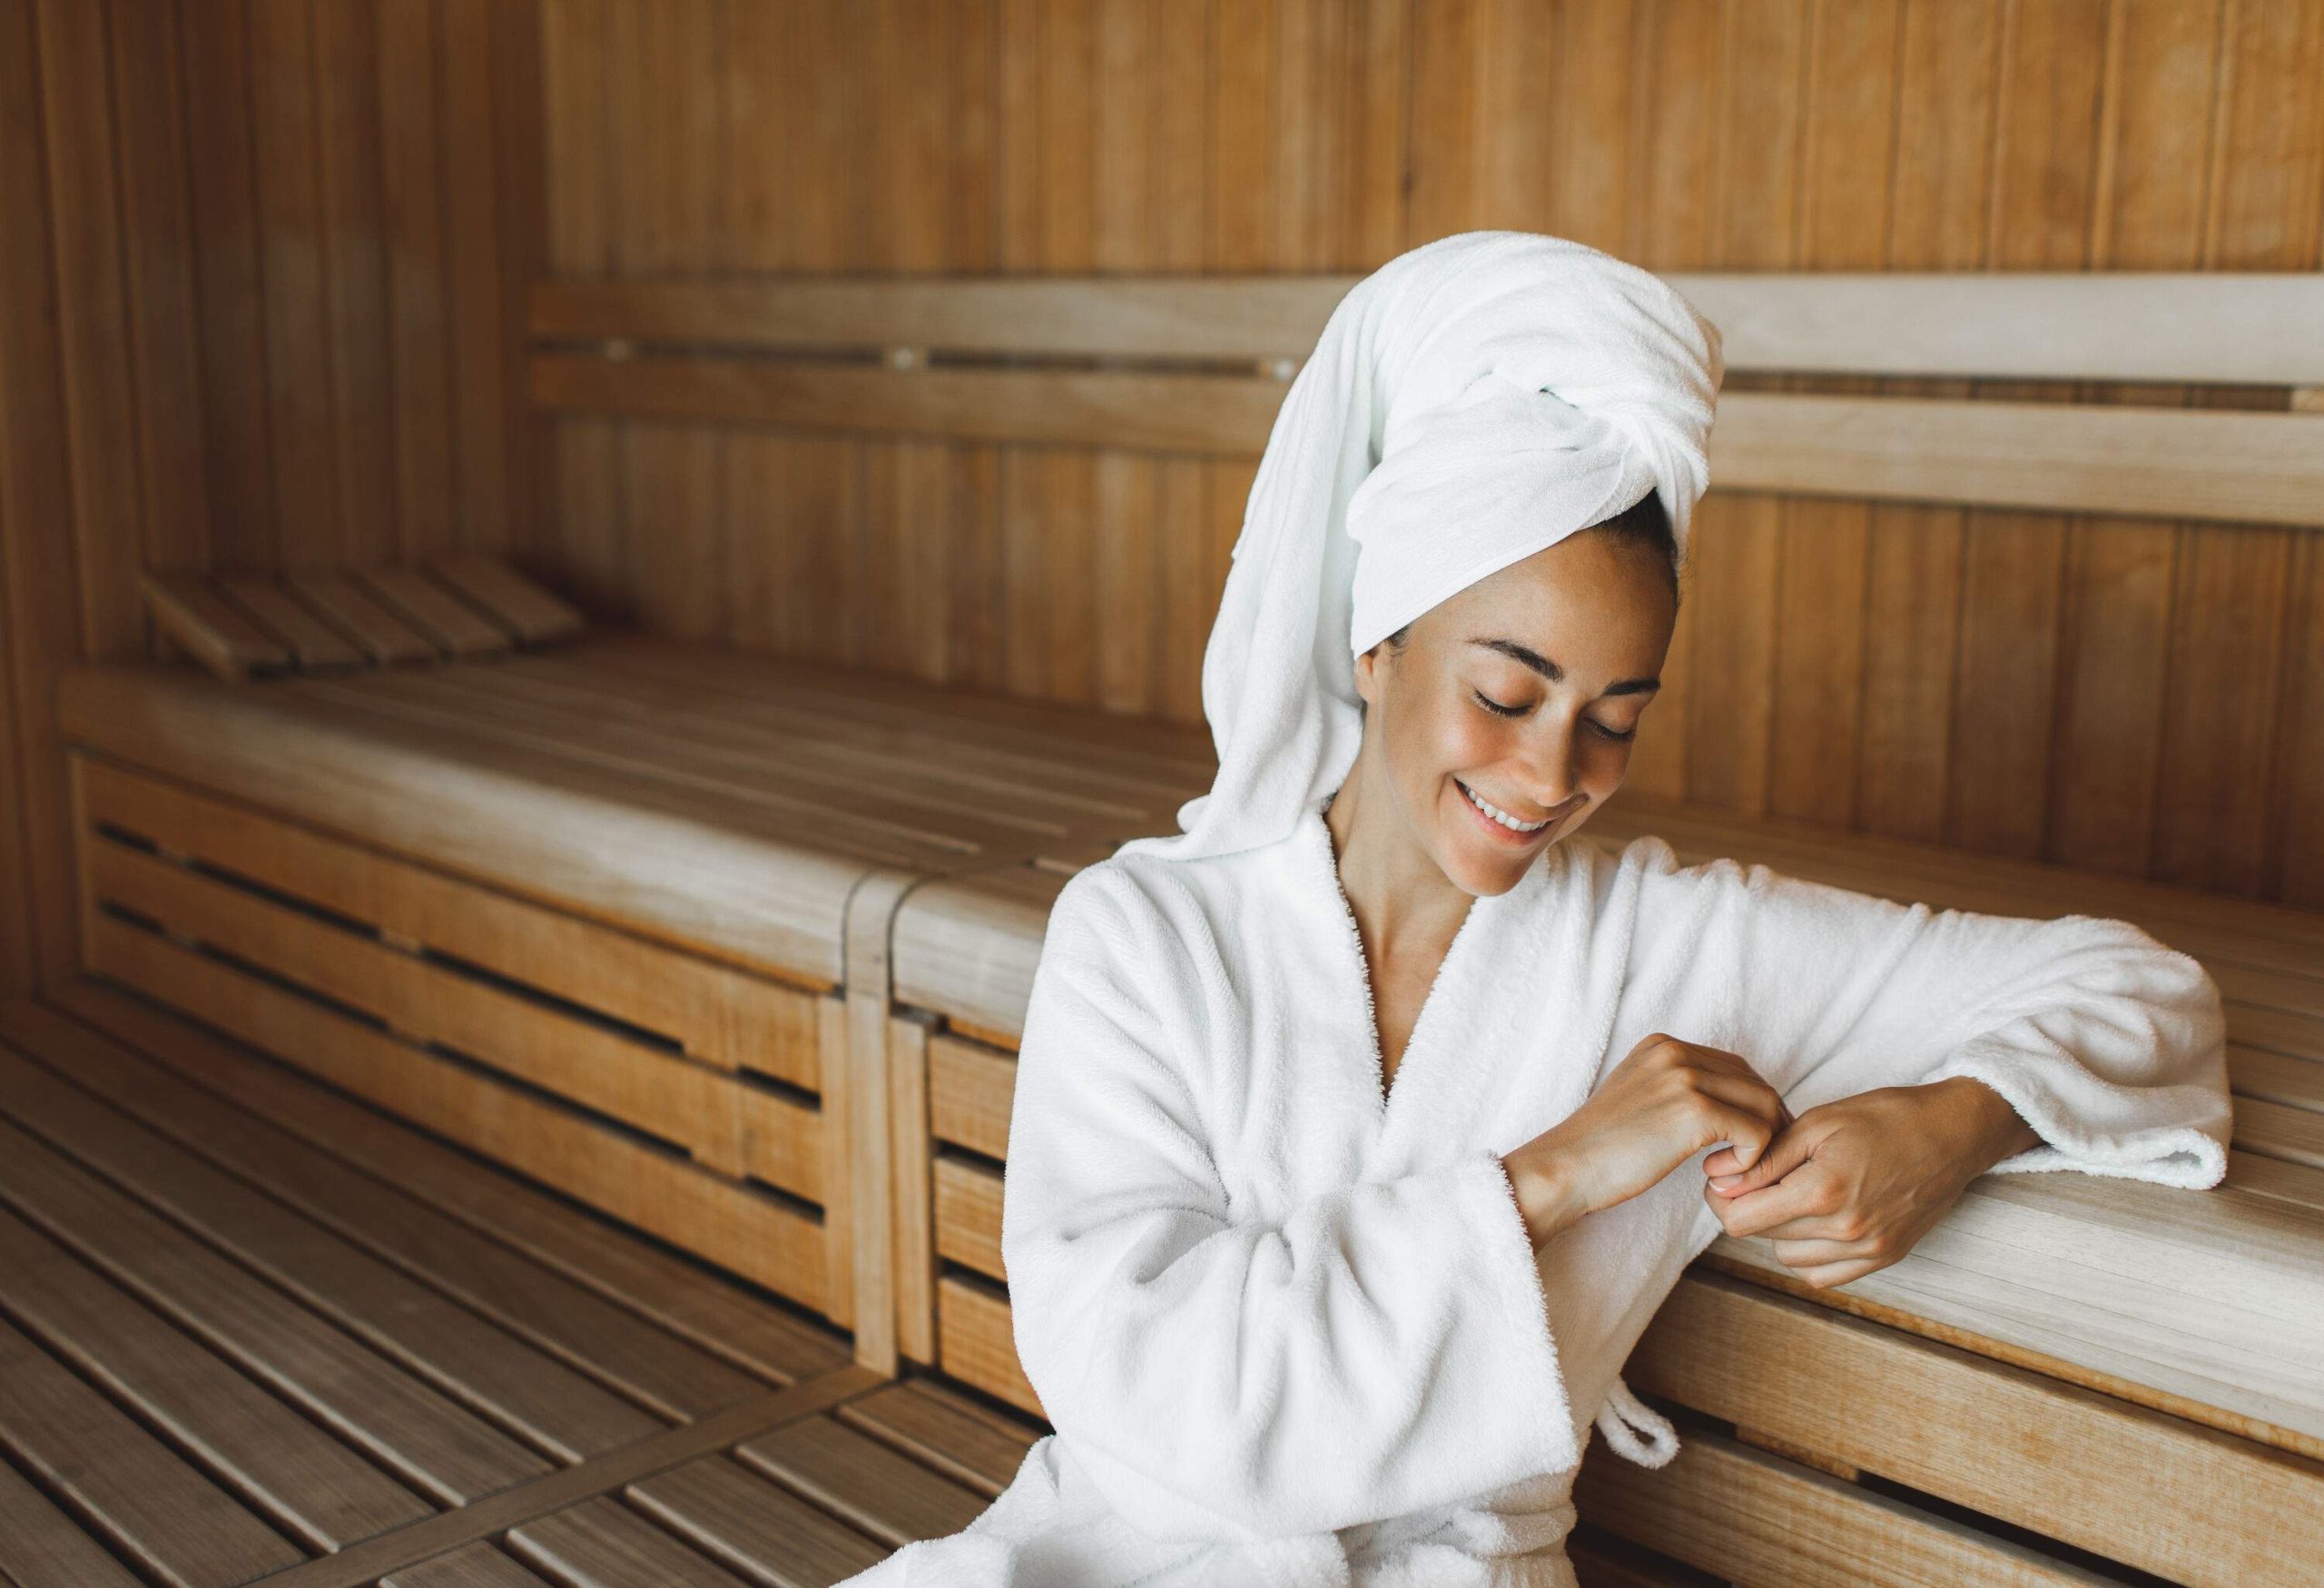 A woman in a bathrobe and towel on her head smiles as she sits inside a dry sauna.